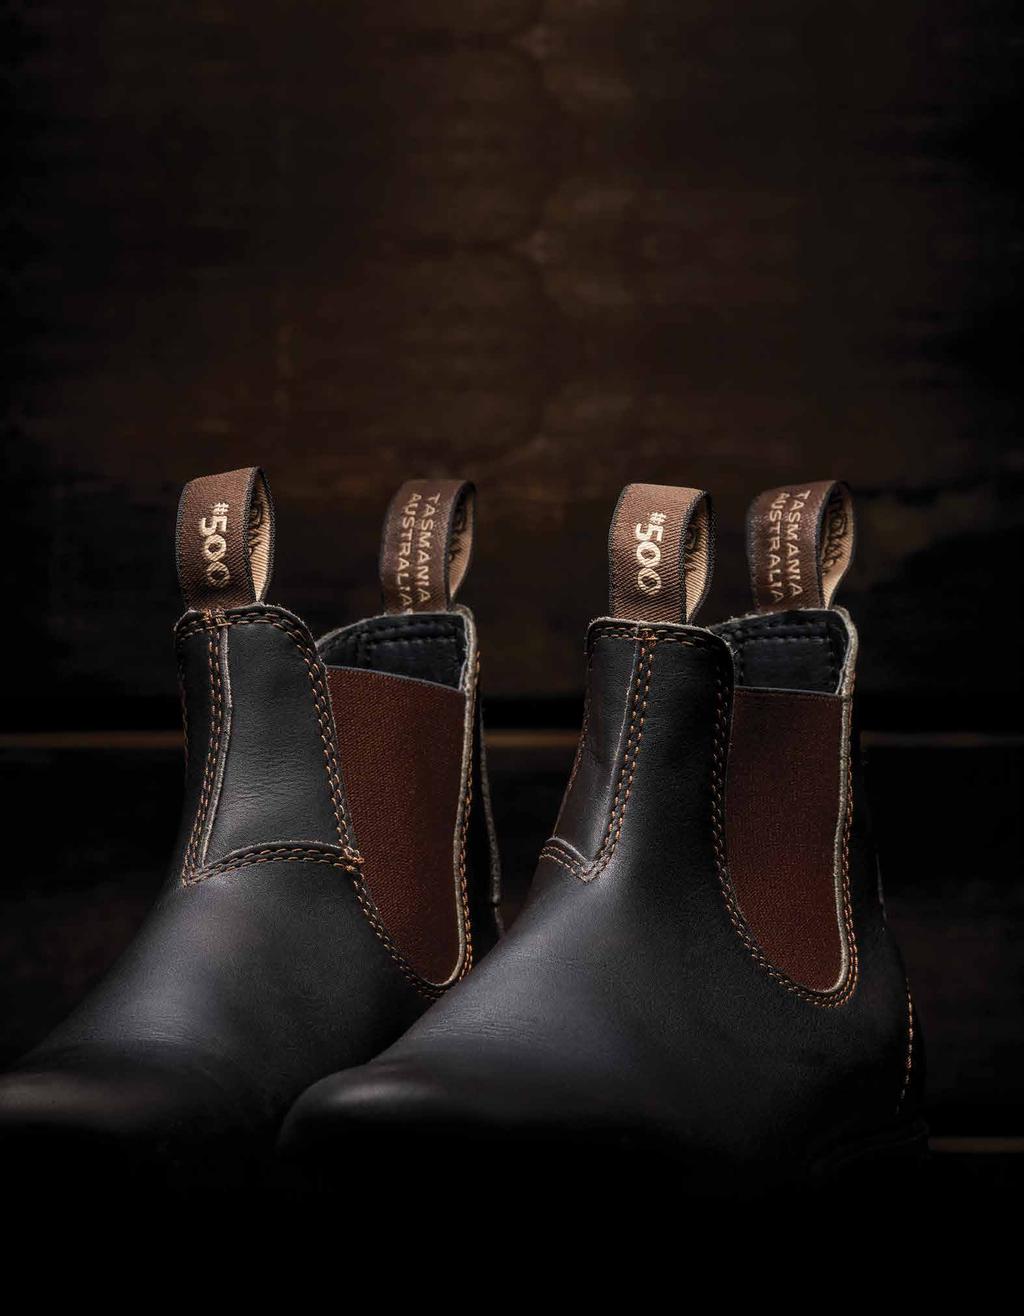 50 YEARS OF ROAMING An icon since its debut, the Blundstone Original 500 Series